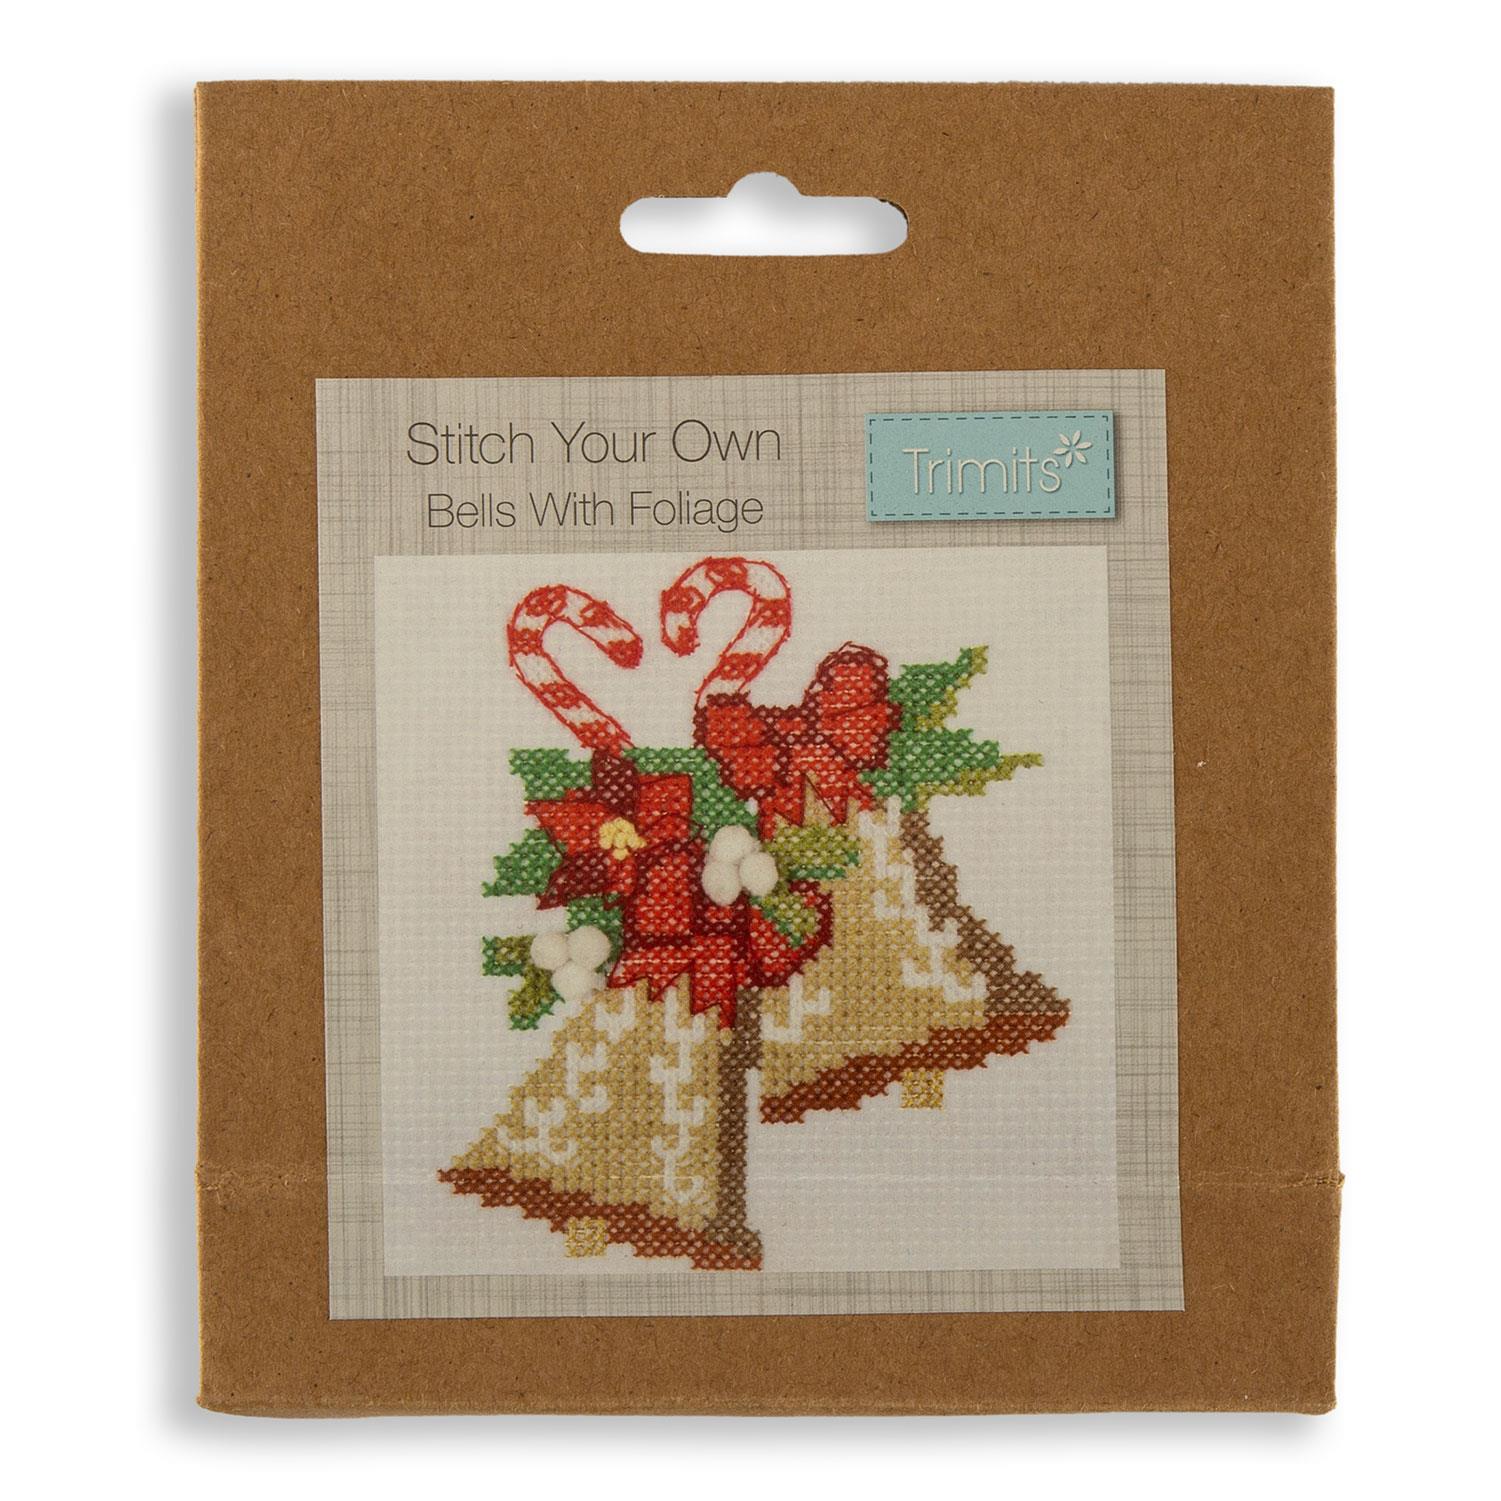 Trimits Christmas Counted Cross Stitch Kit - Choose Any 4 - Bells with Foliage